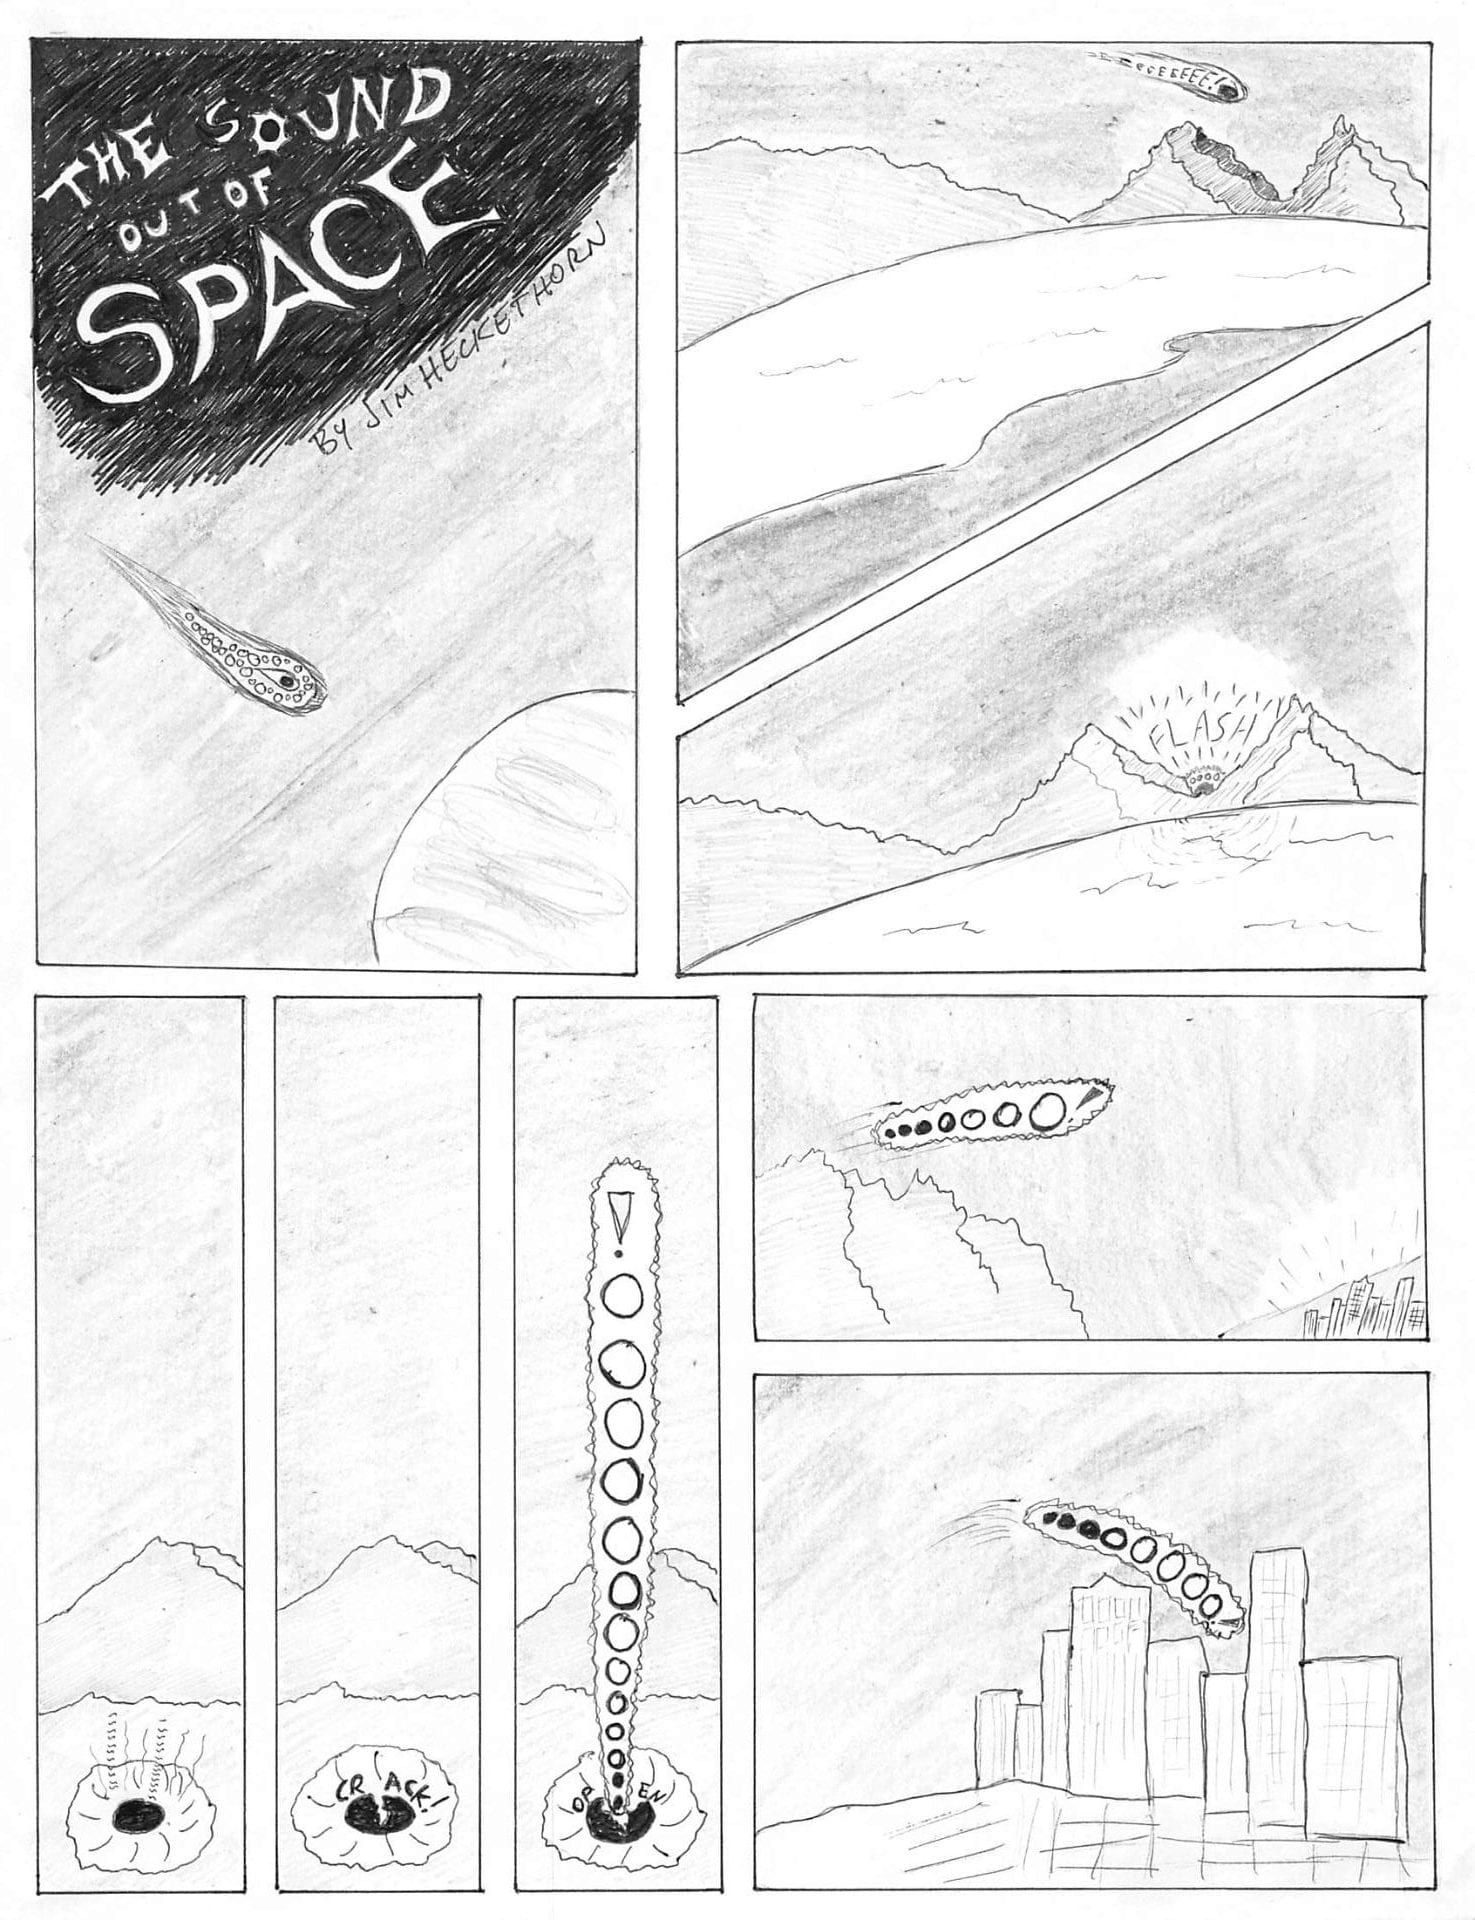 J. Heckethorn - Comic Page 1 - A meteor enters a planet's atmosphere and a sound emits from the broken shell.